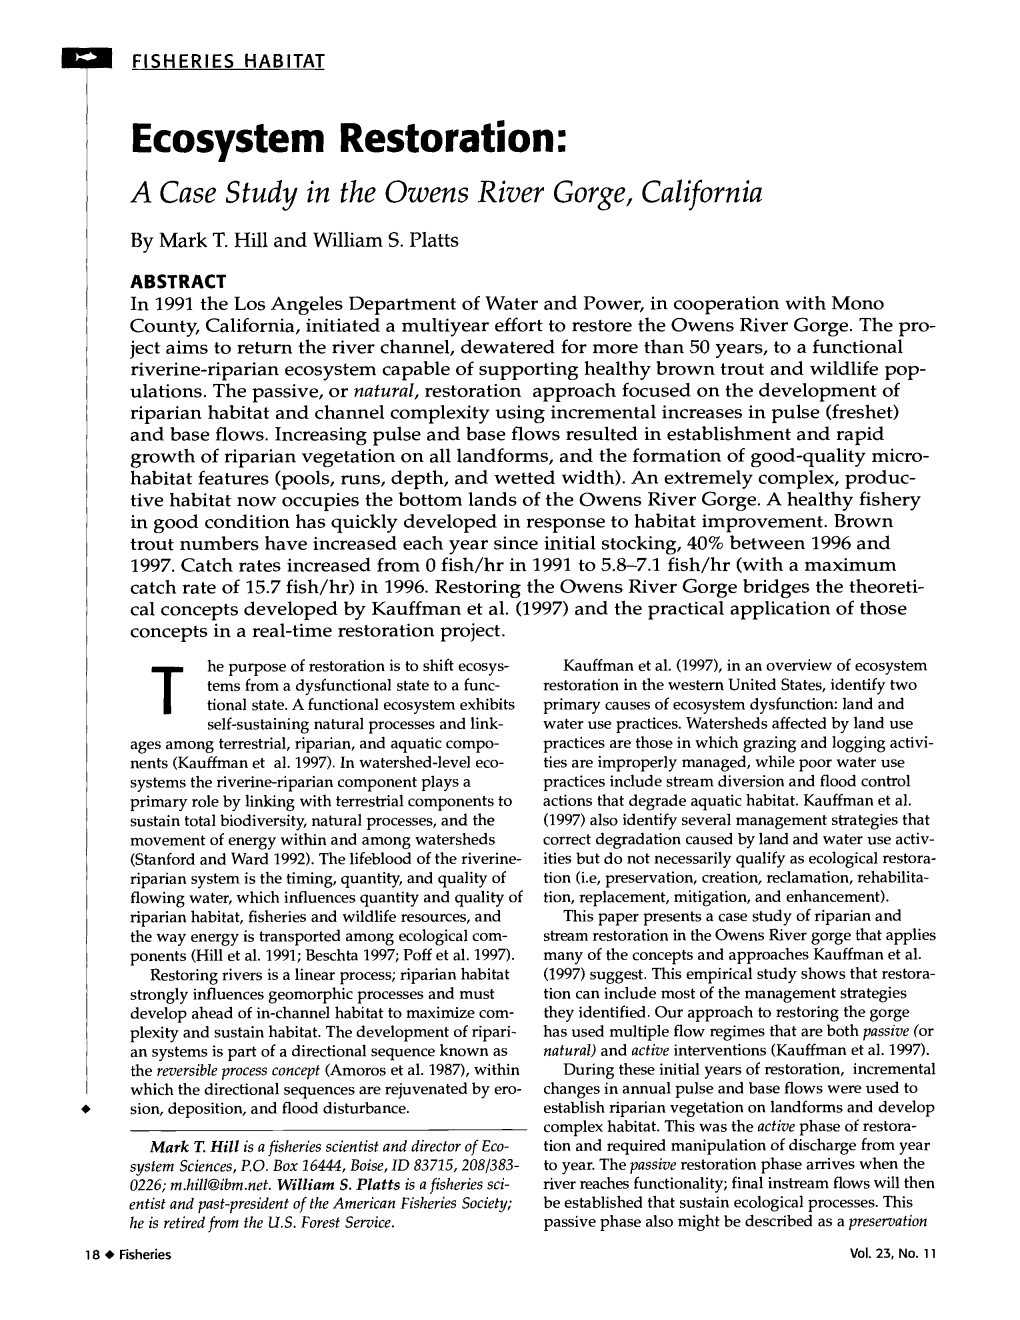 Ecosystem Restoration: a Case Study in the Owens River Gorge, California